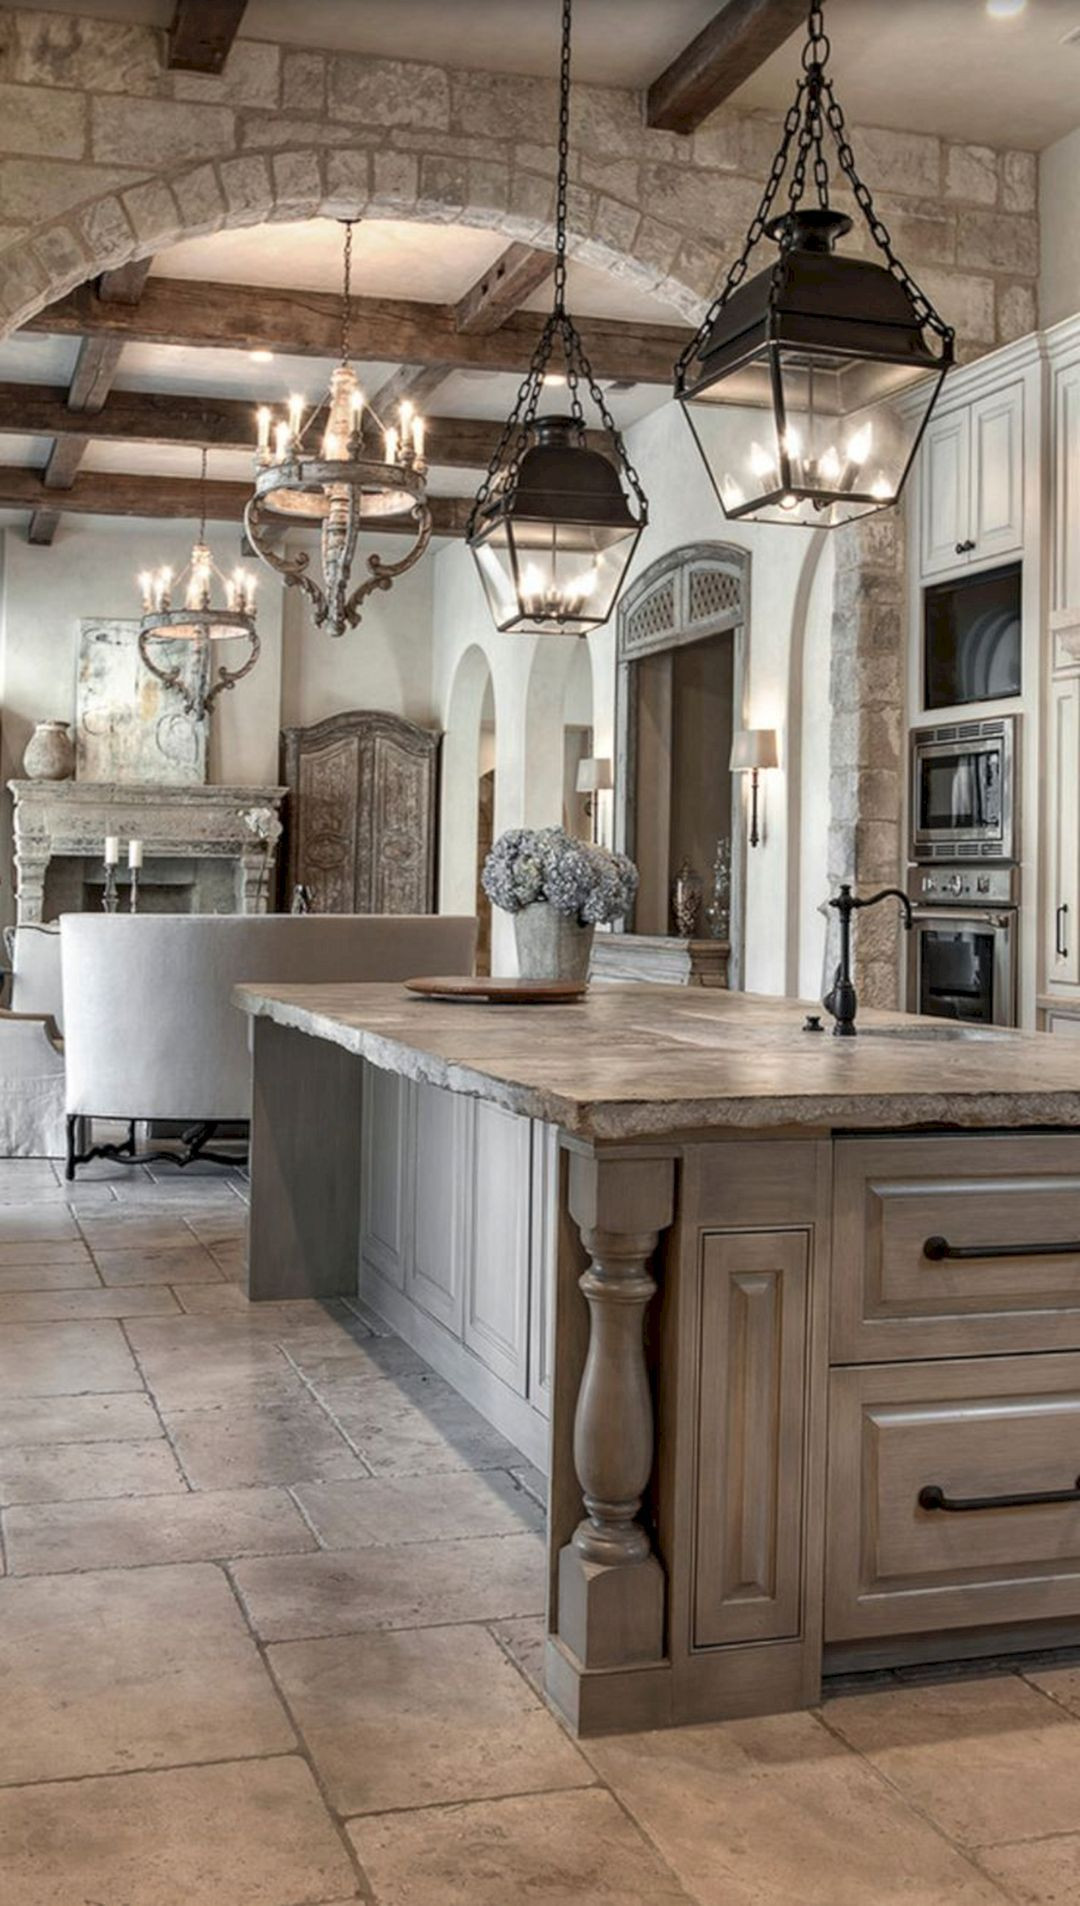 Rustic Kitchen Accessories
 10 Best Rustic Italian Houses Decorating Ideas